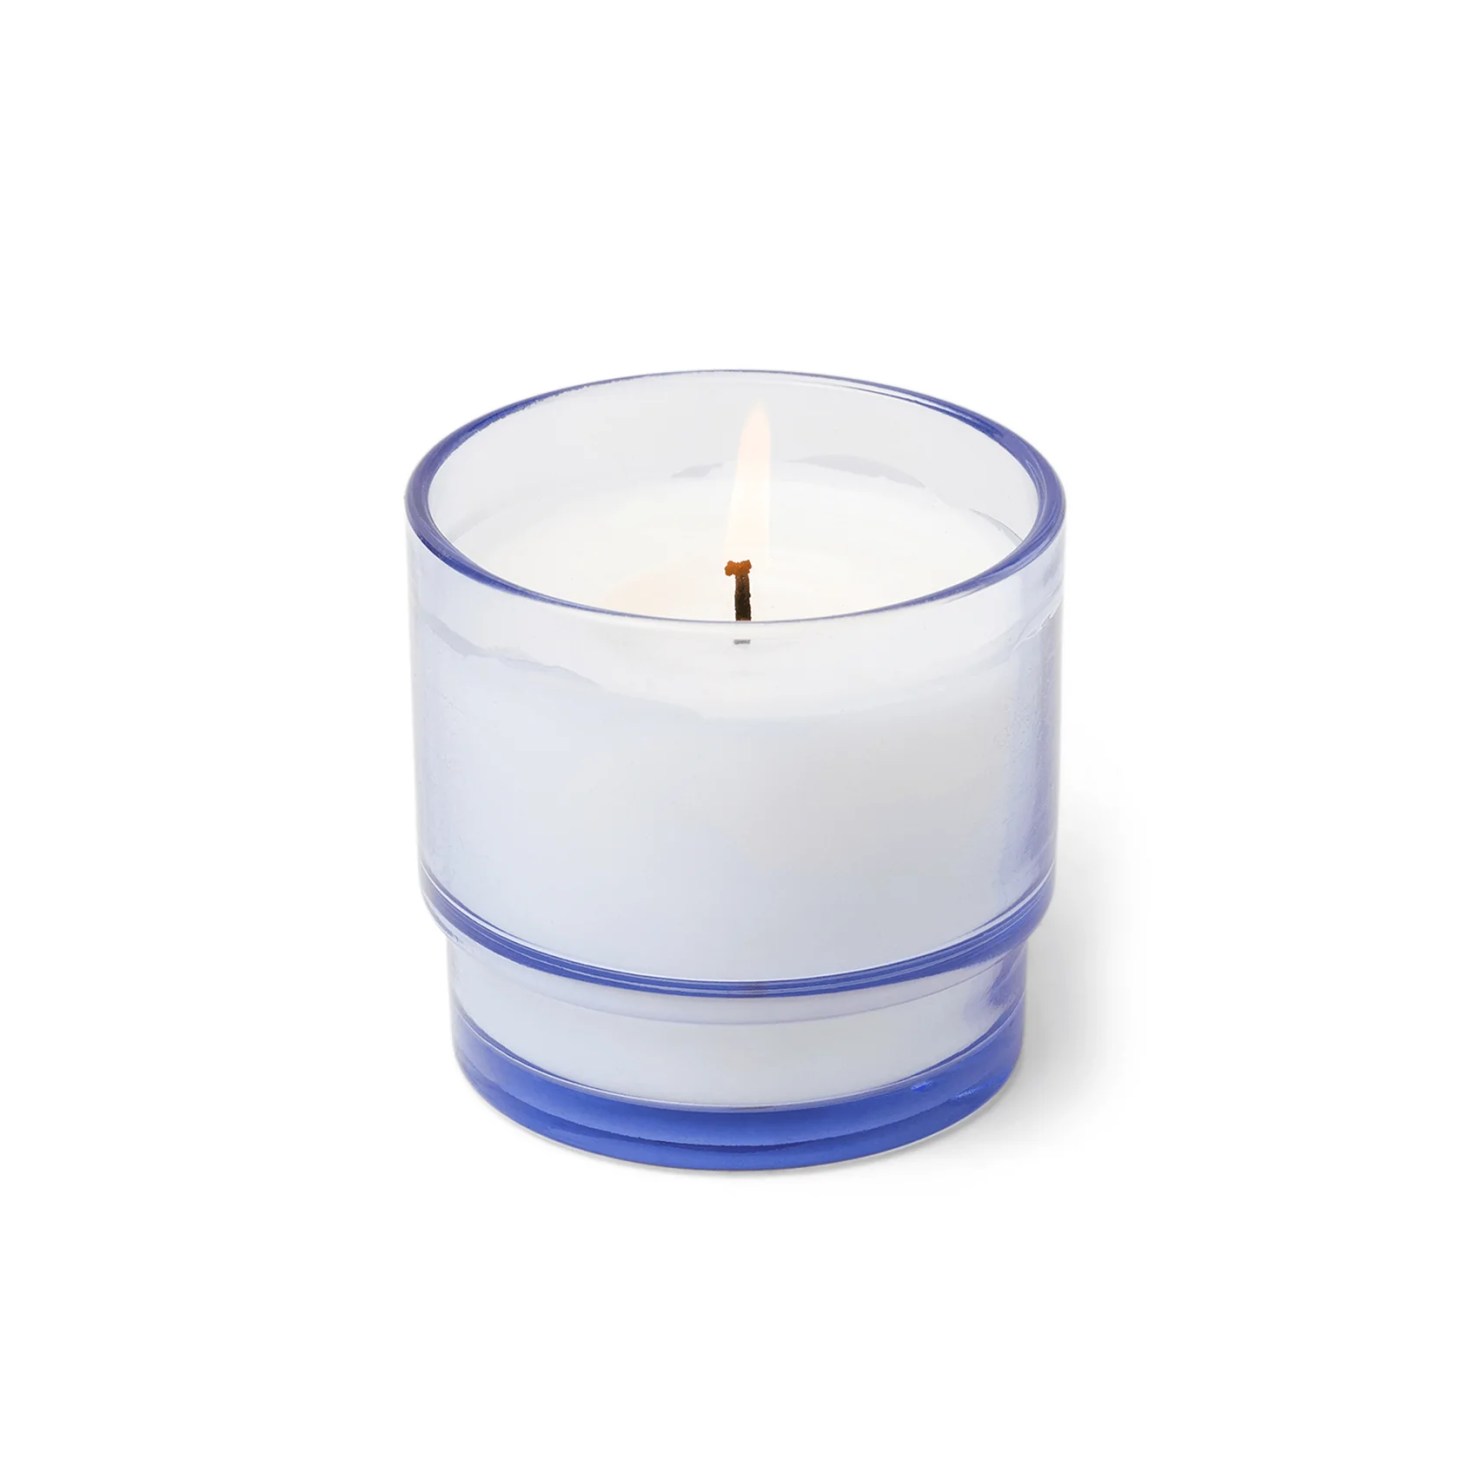 paddywax rosemary candle vessel, a candle for focus while wfh